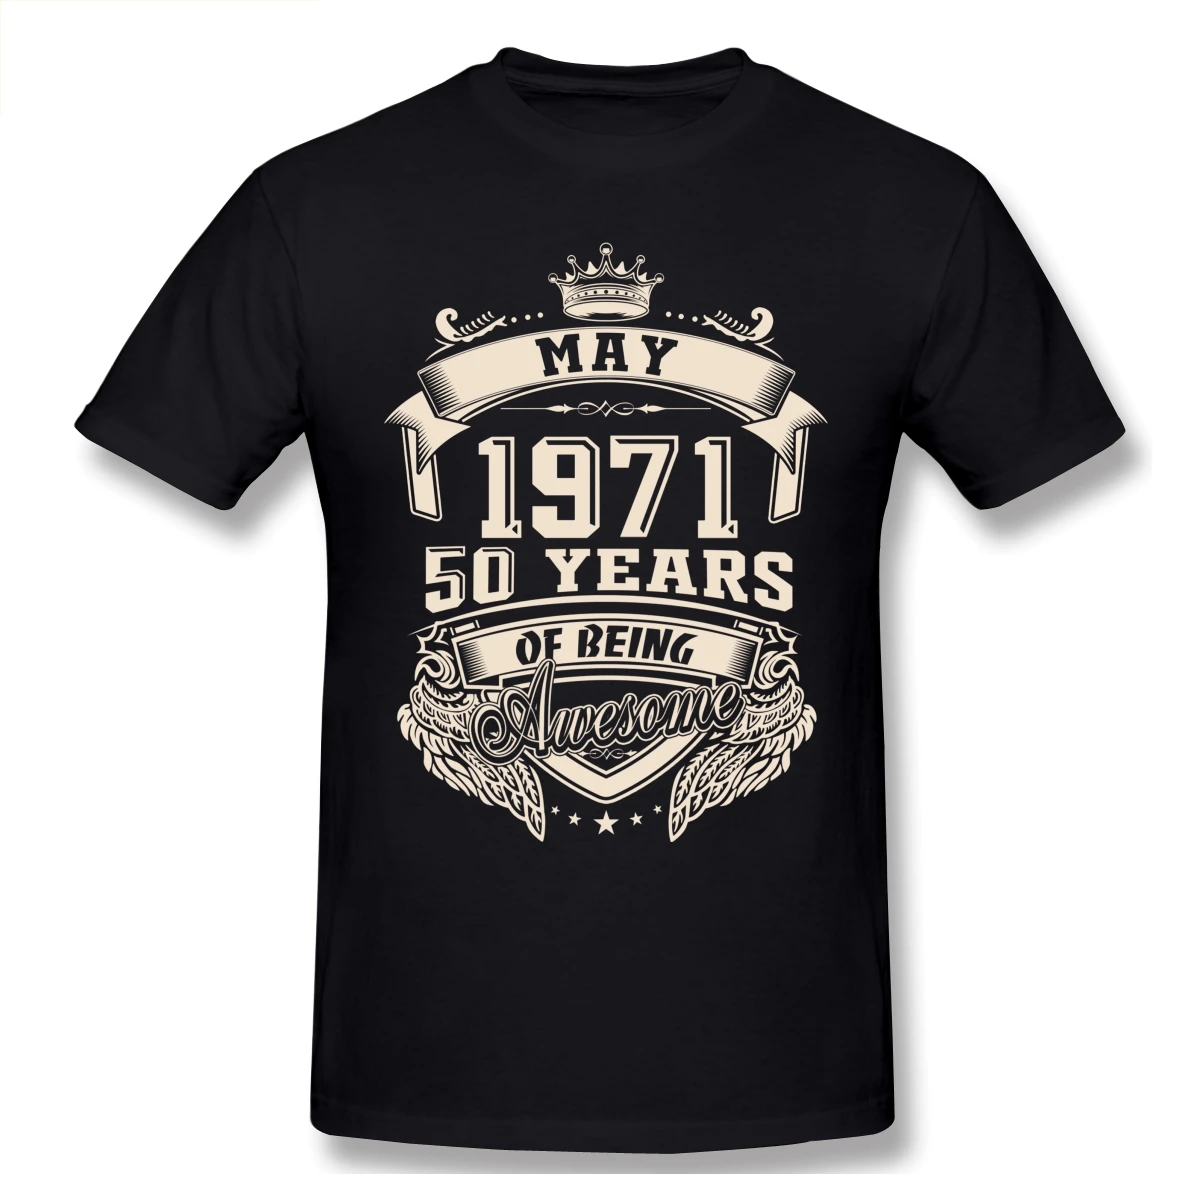 

Born In May 1971 50 Years Of Being Awesome T Shirt Plus Size Cotton Crewneck Short Sleeve T Shirts